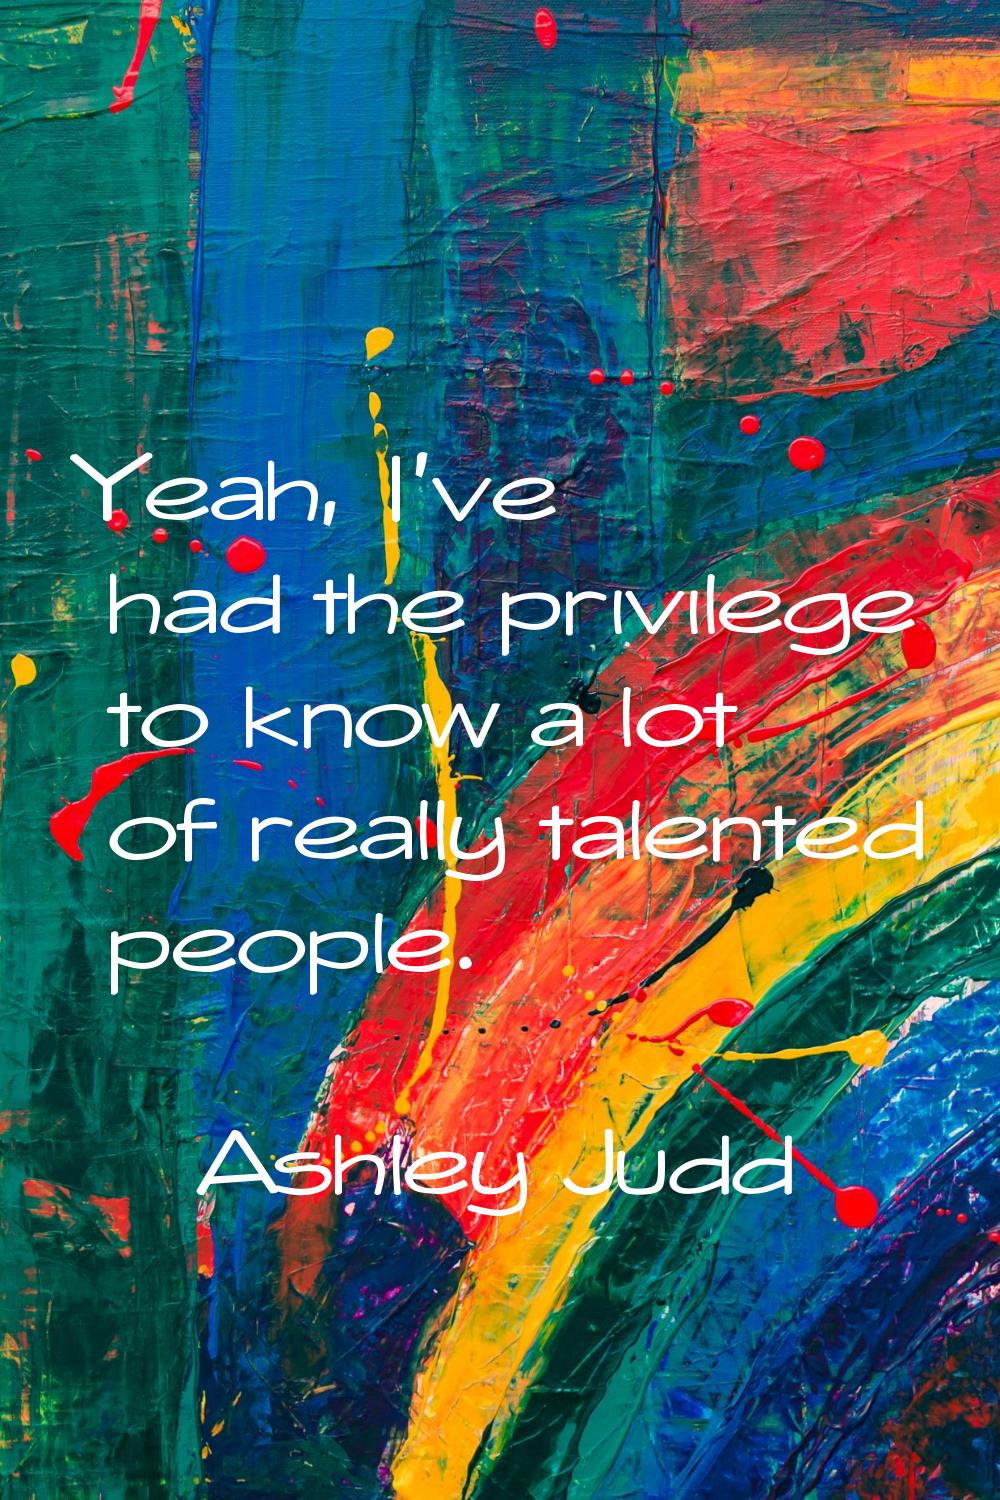 Yeah, I've had the privilege to know a lot of really talented people.